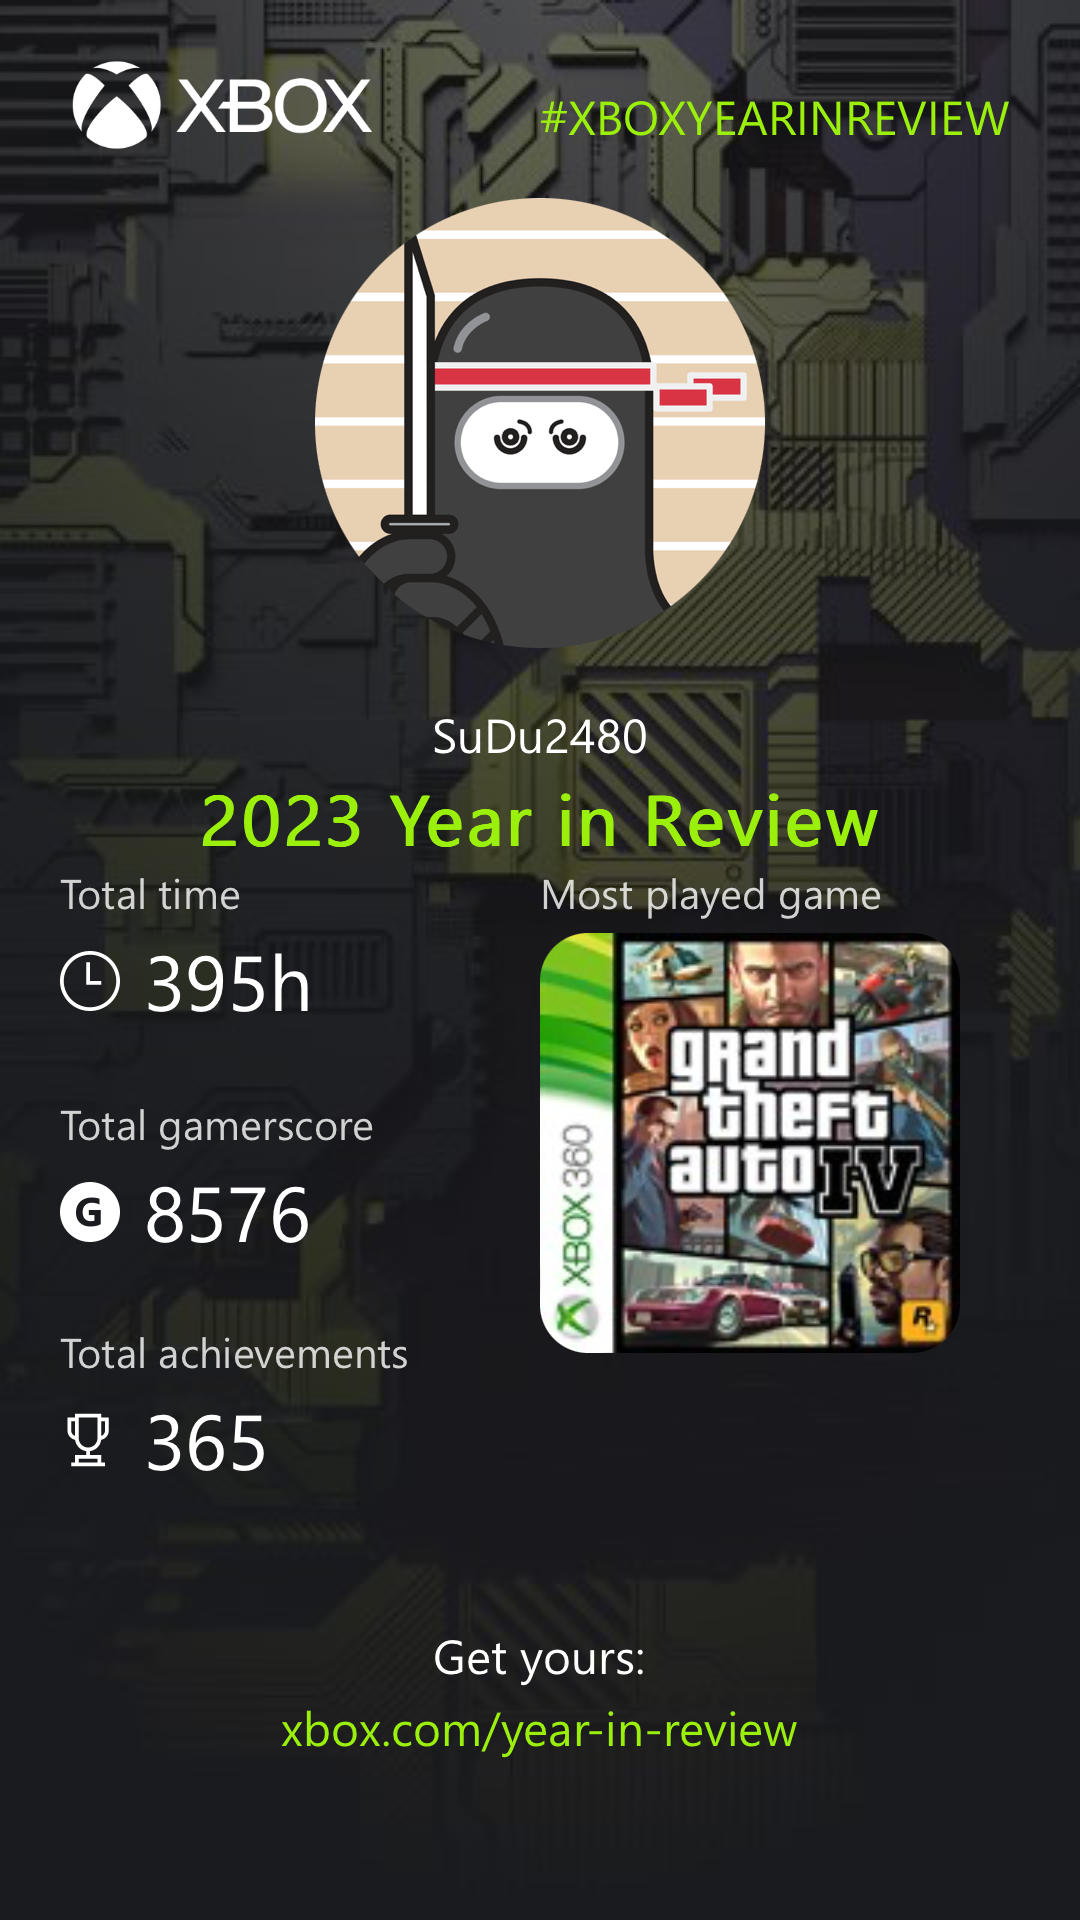 XBox 2023 YEAR IN REVIEW